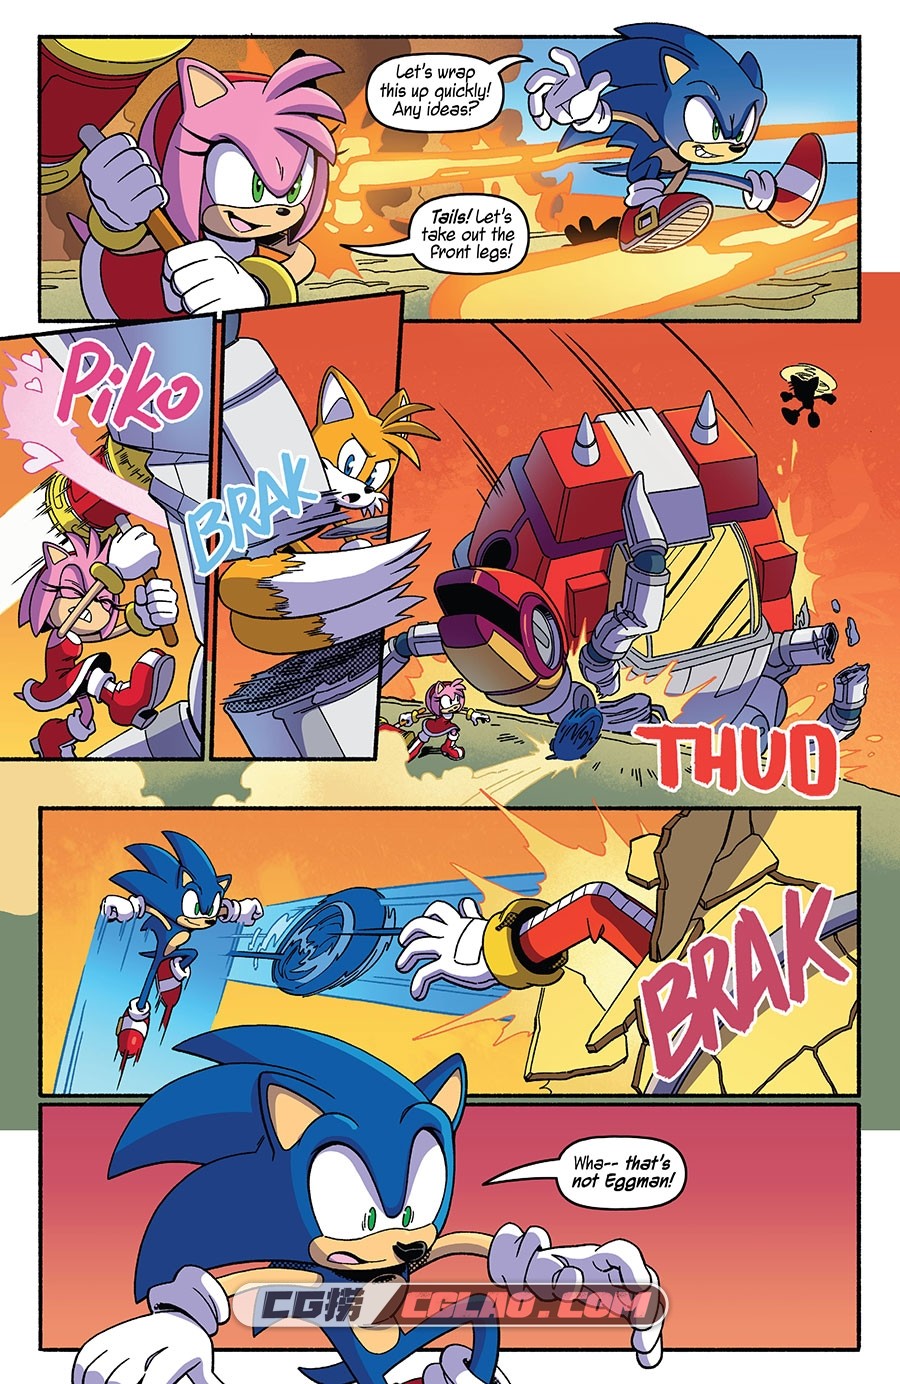 Sonic Frontiers Prologue Convergence 漫画 百度网盘下载,Sonic-Frontiers-Prologue---Convergence-005.jpg